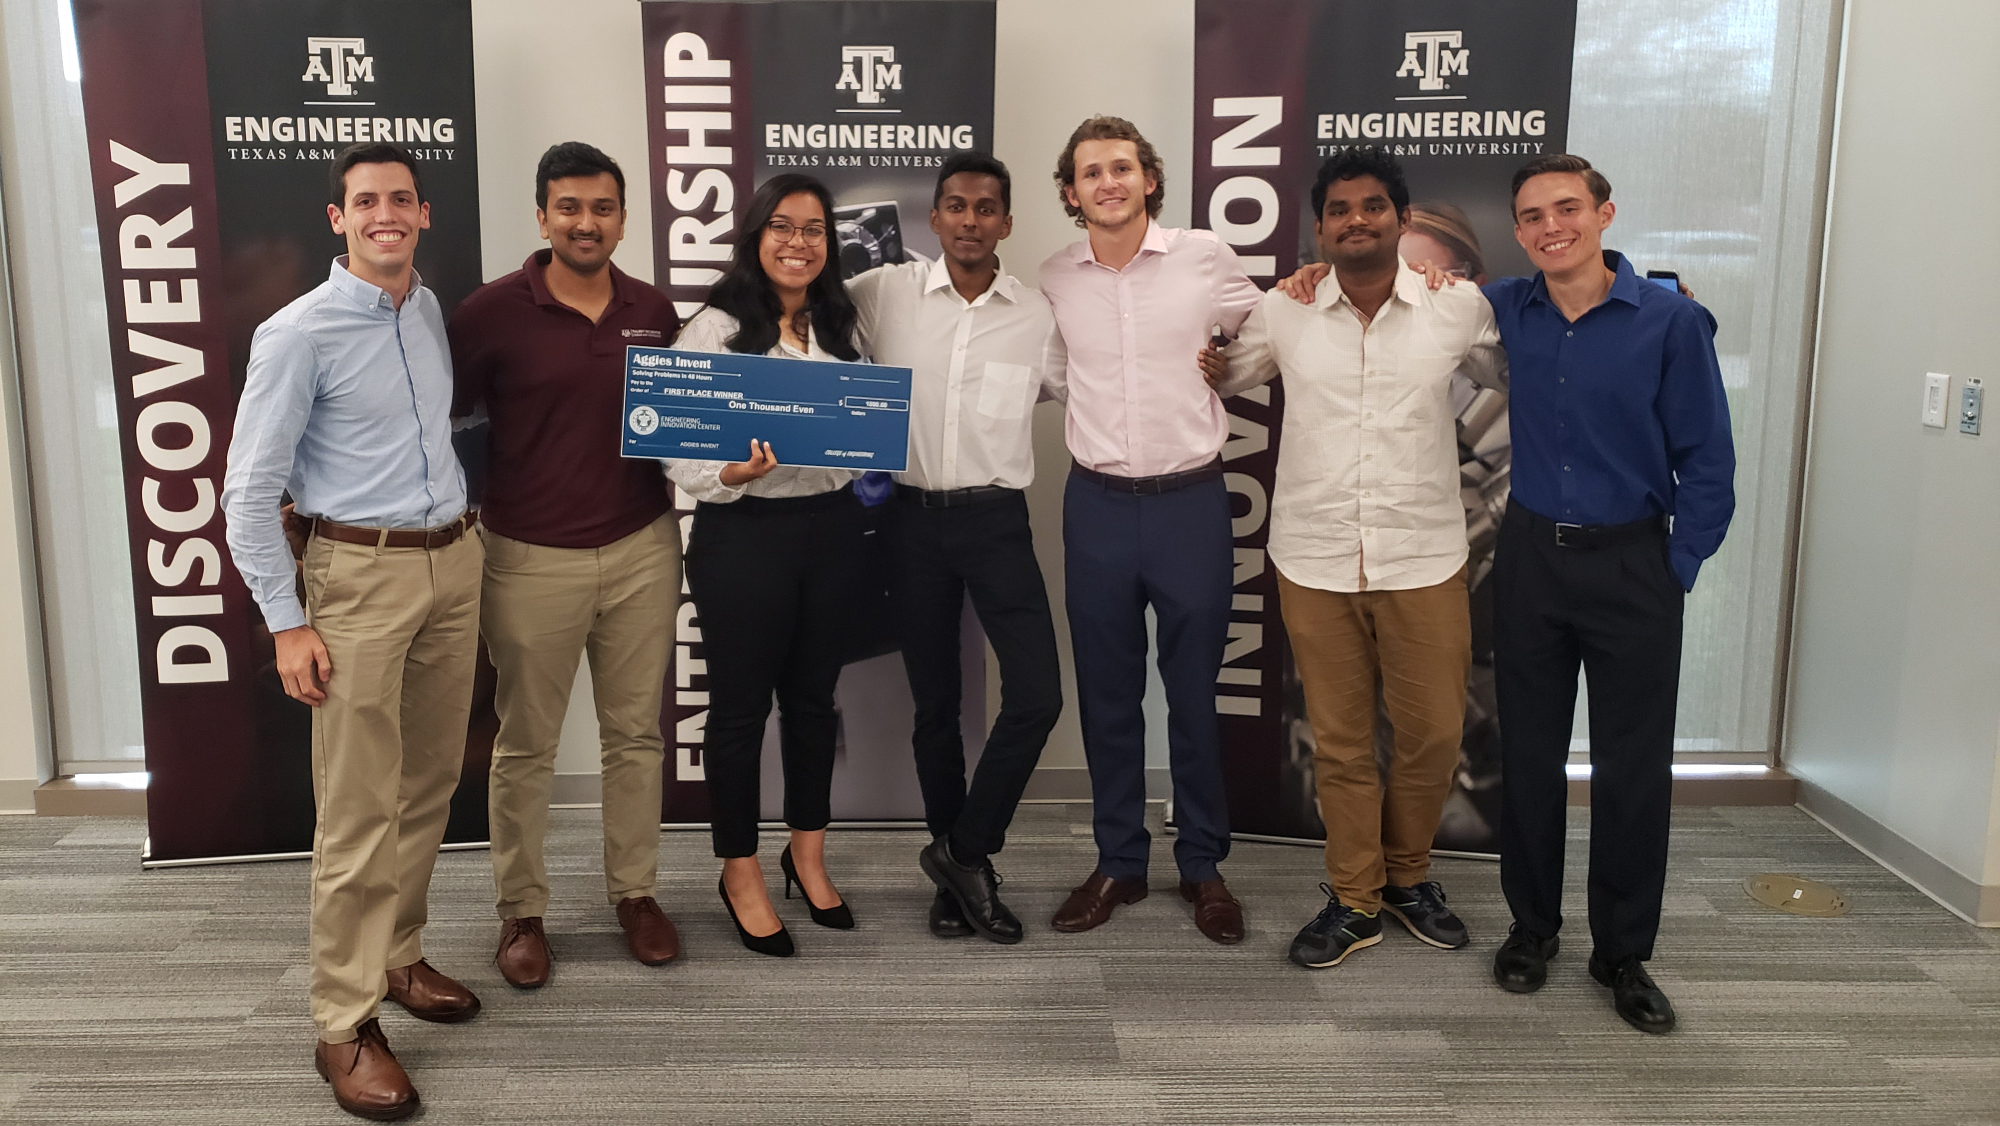 Team Flo-BOT-emist pose with their $1,000 prize at EnMed Aggies Invent 2019.